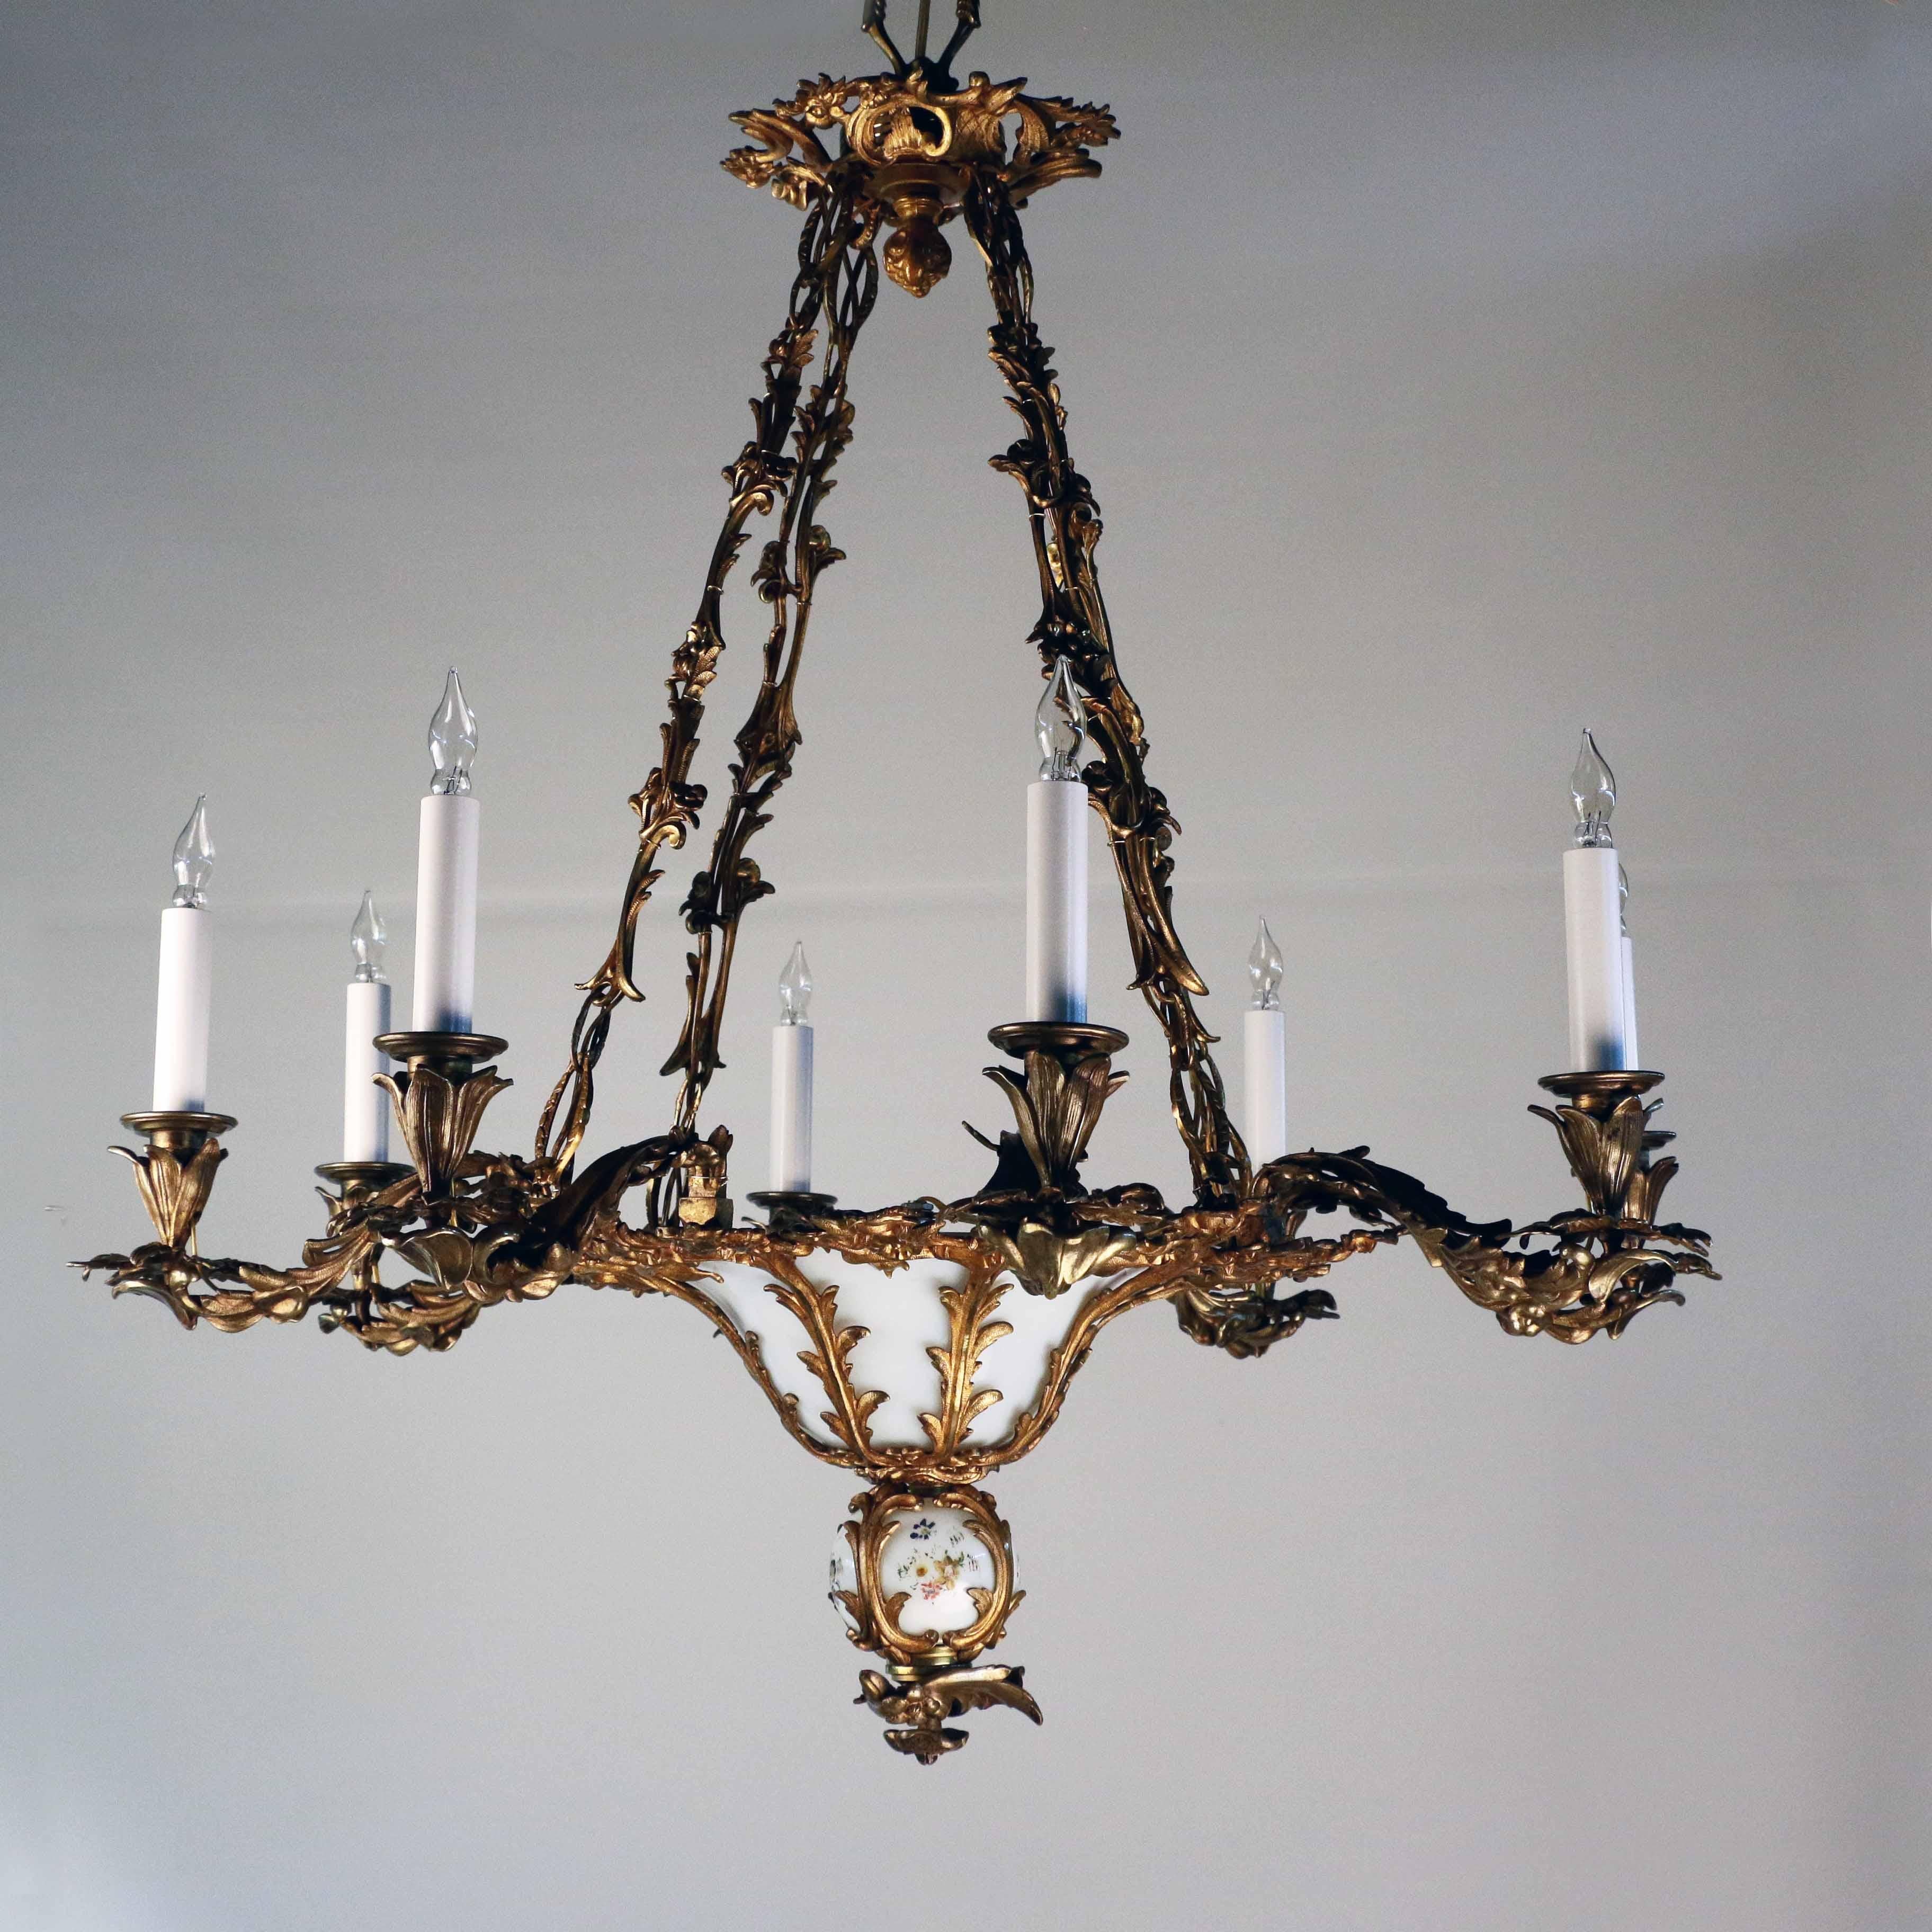 This elegant chandelier dates from the third quarter of the 19th century, It was made for candles but we wired it (without damaging it) for your greater convenience. Its overall feel is one of openness and naturalistism. The suspension chains are